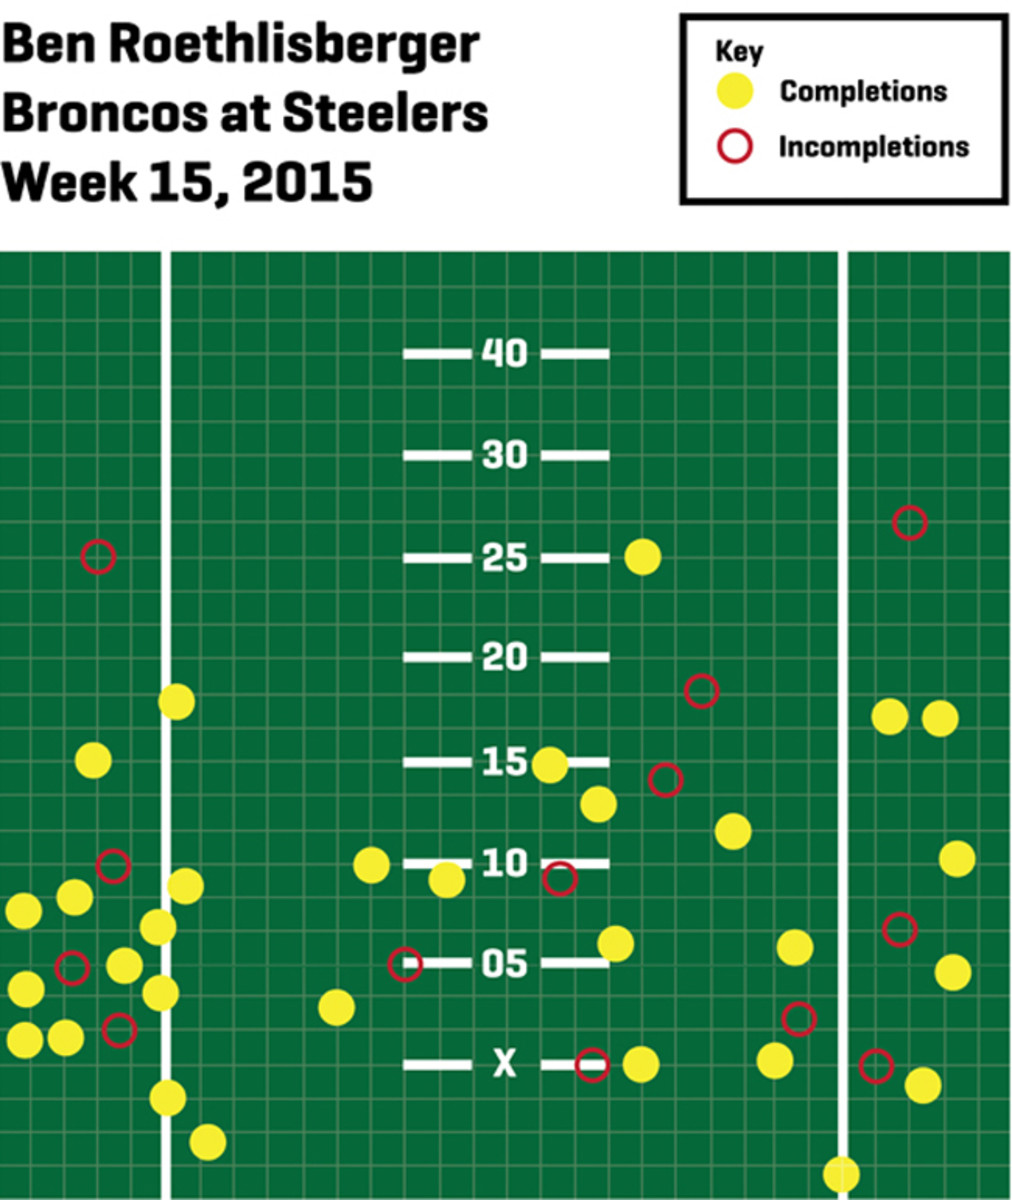 Note: Only depicts plays for which Von Miller was on the field.